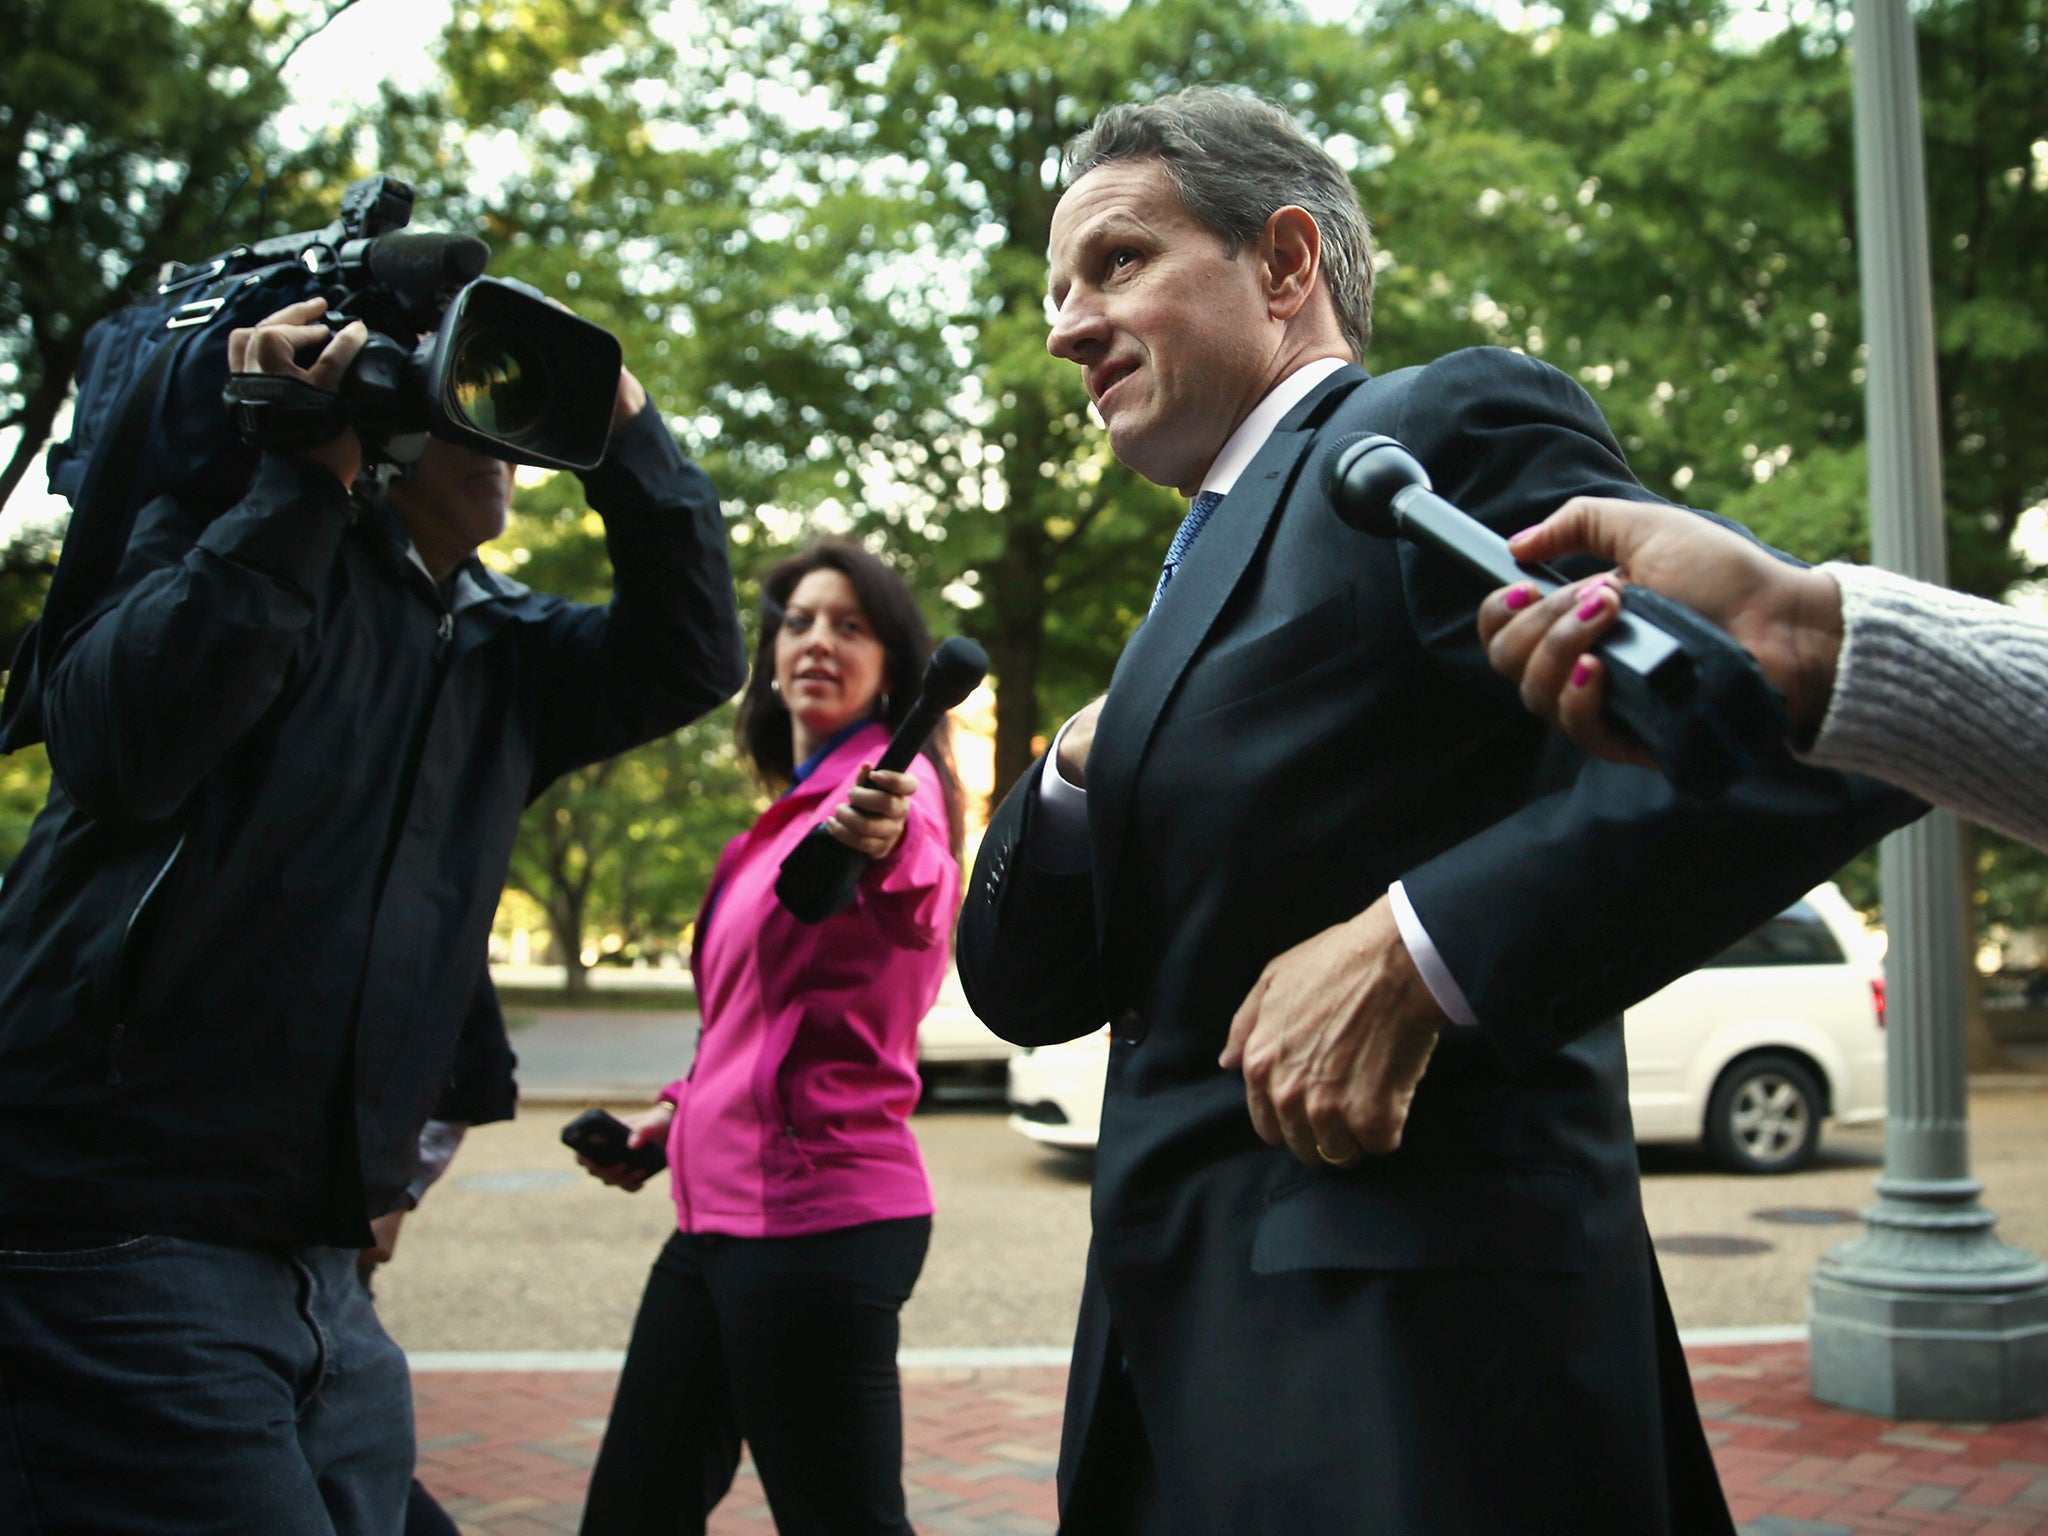 The former US Treasury Secretary Tim Geithner arrives at Court to testify at the AIG trial